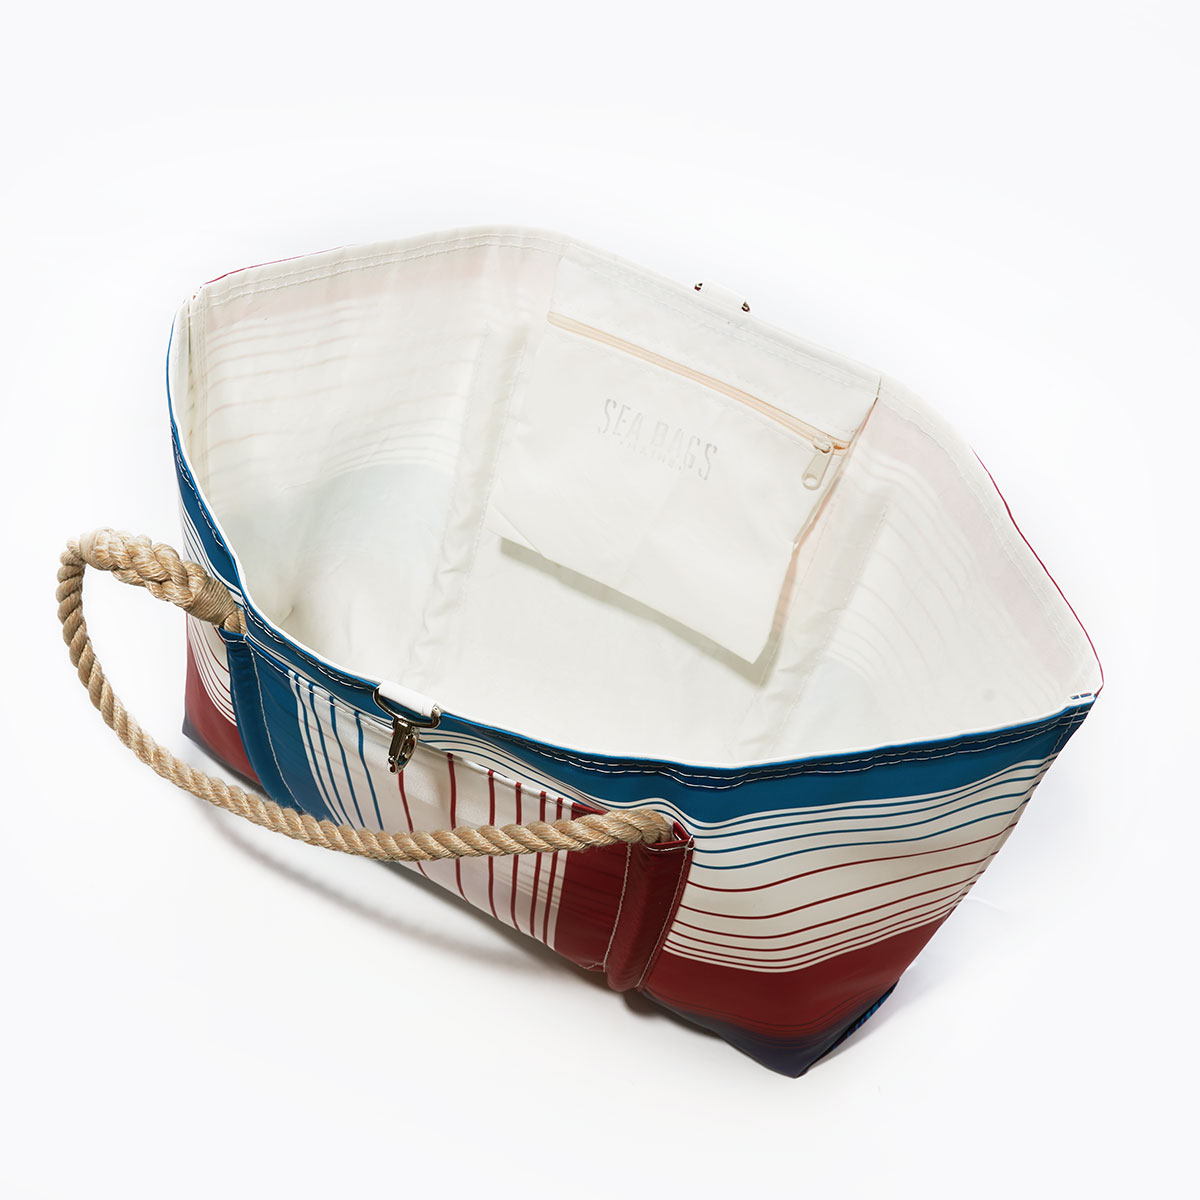 inside view of patriotic plaid stripes in red white and blue printed on recycled sail cloth large pier tote with hemp rope handles